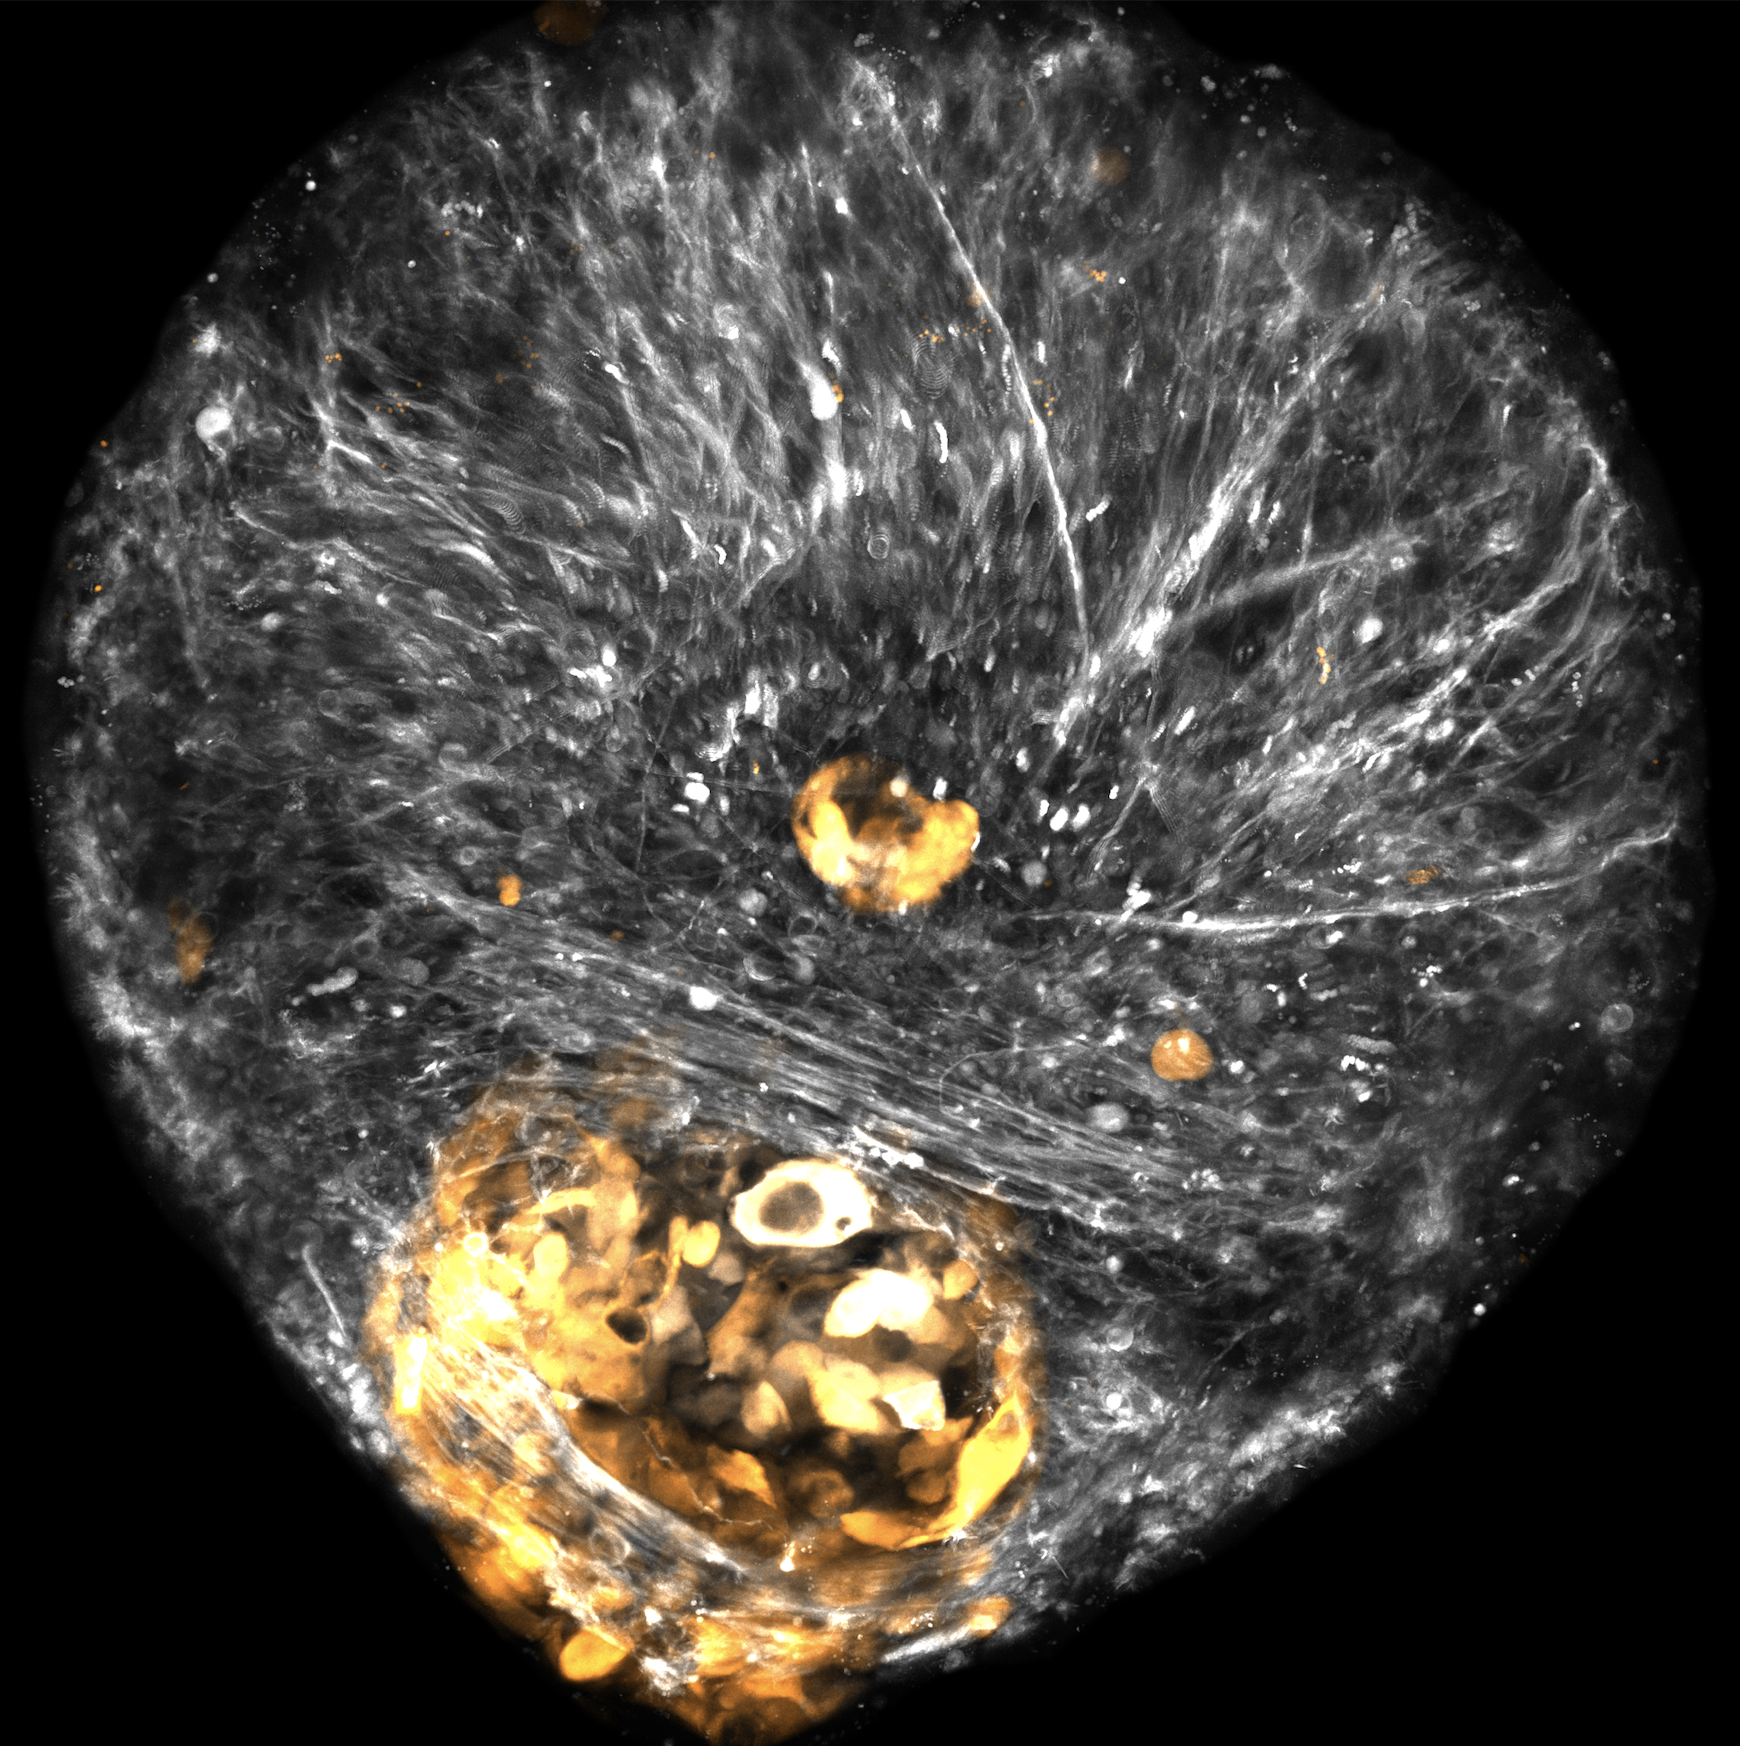 Meningioma cells (gold) invade a 3D cultured brain organoid (white) grown from human stem cells.